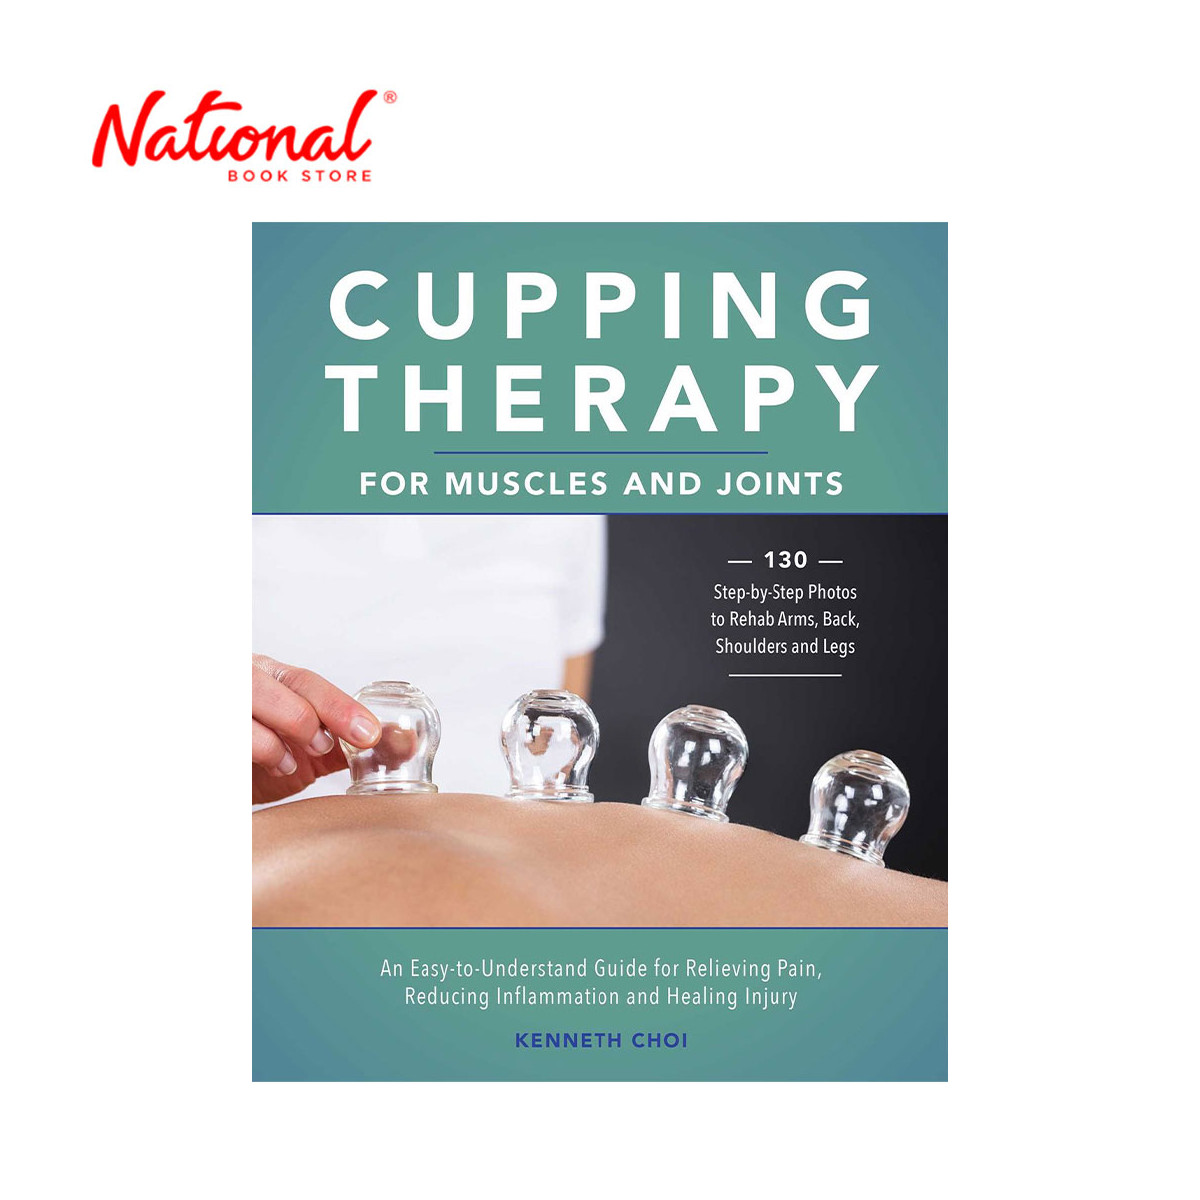 Cupping Therapy for Muscles and Joints by Kenneth Choi - Trade Paperback - Lifestyle Books